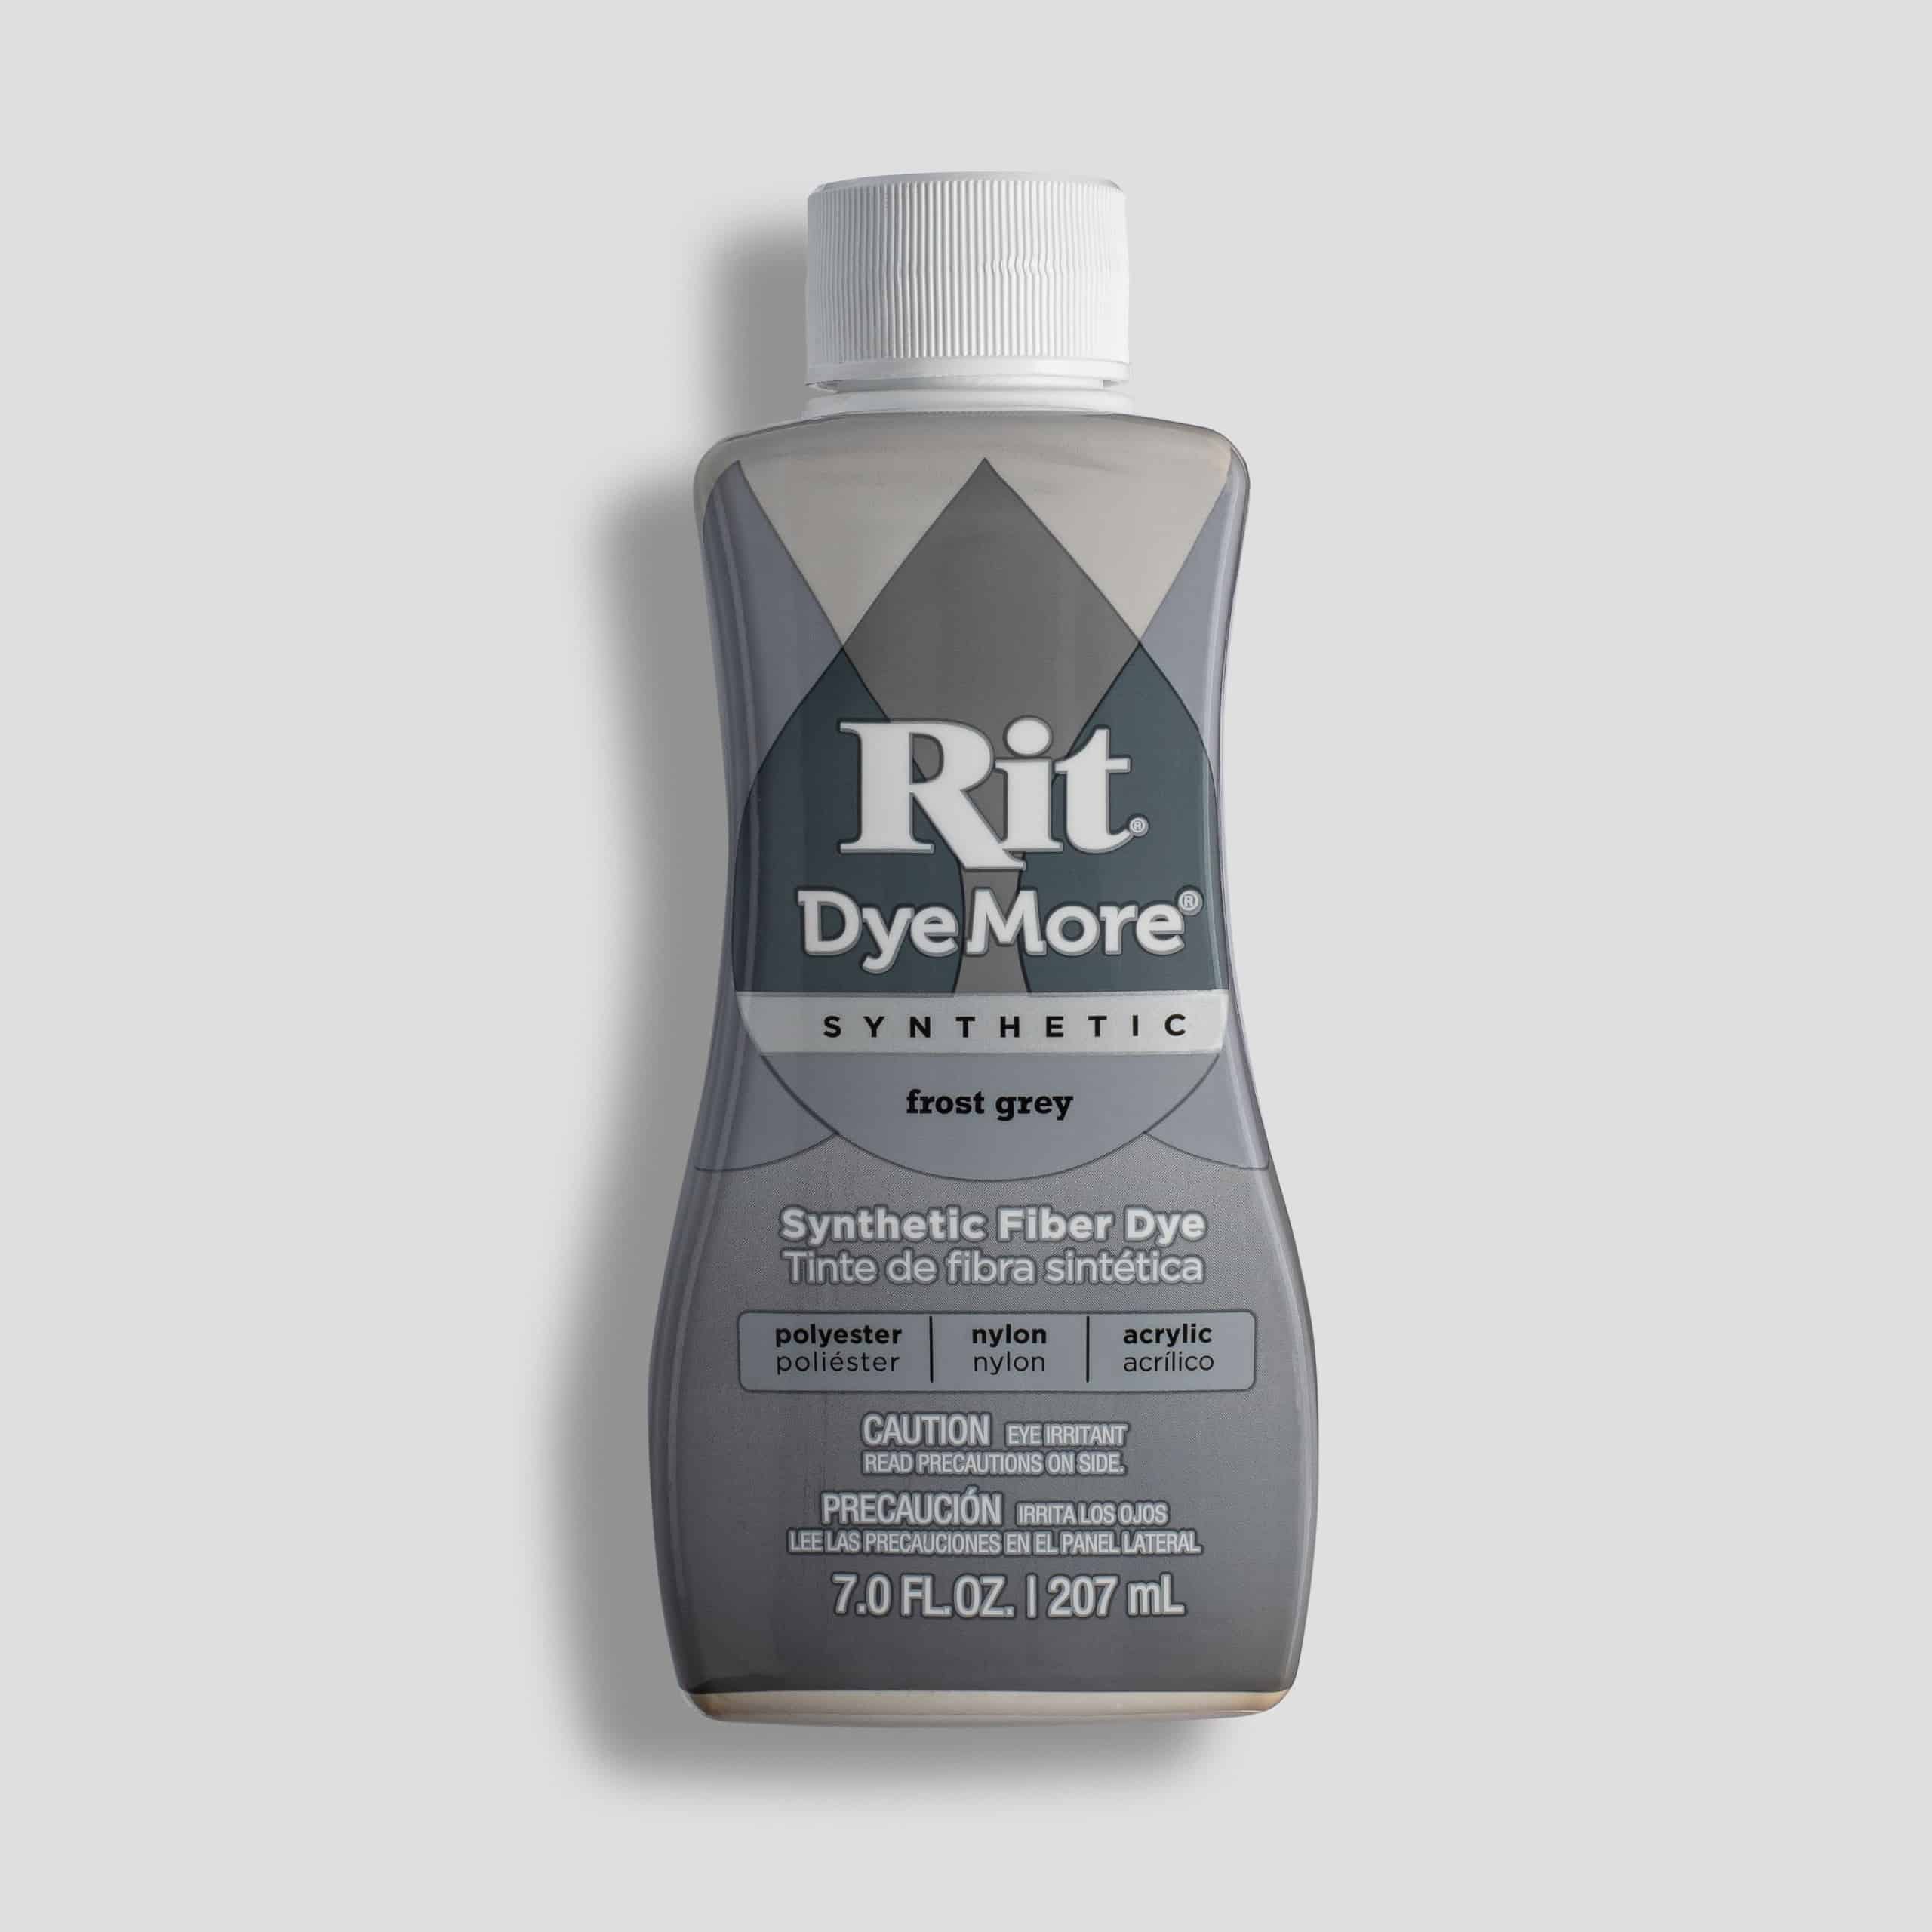 Frost Grey DyeMore for Synthetics – Rit Dye